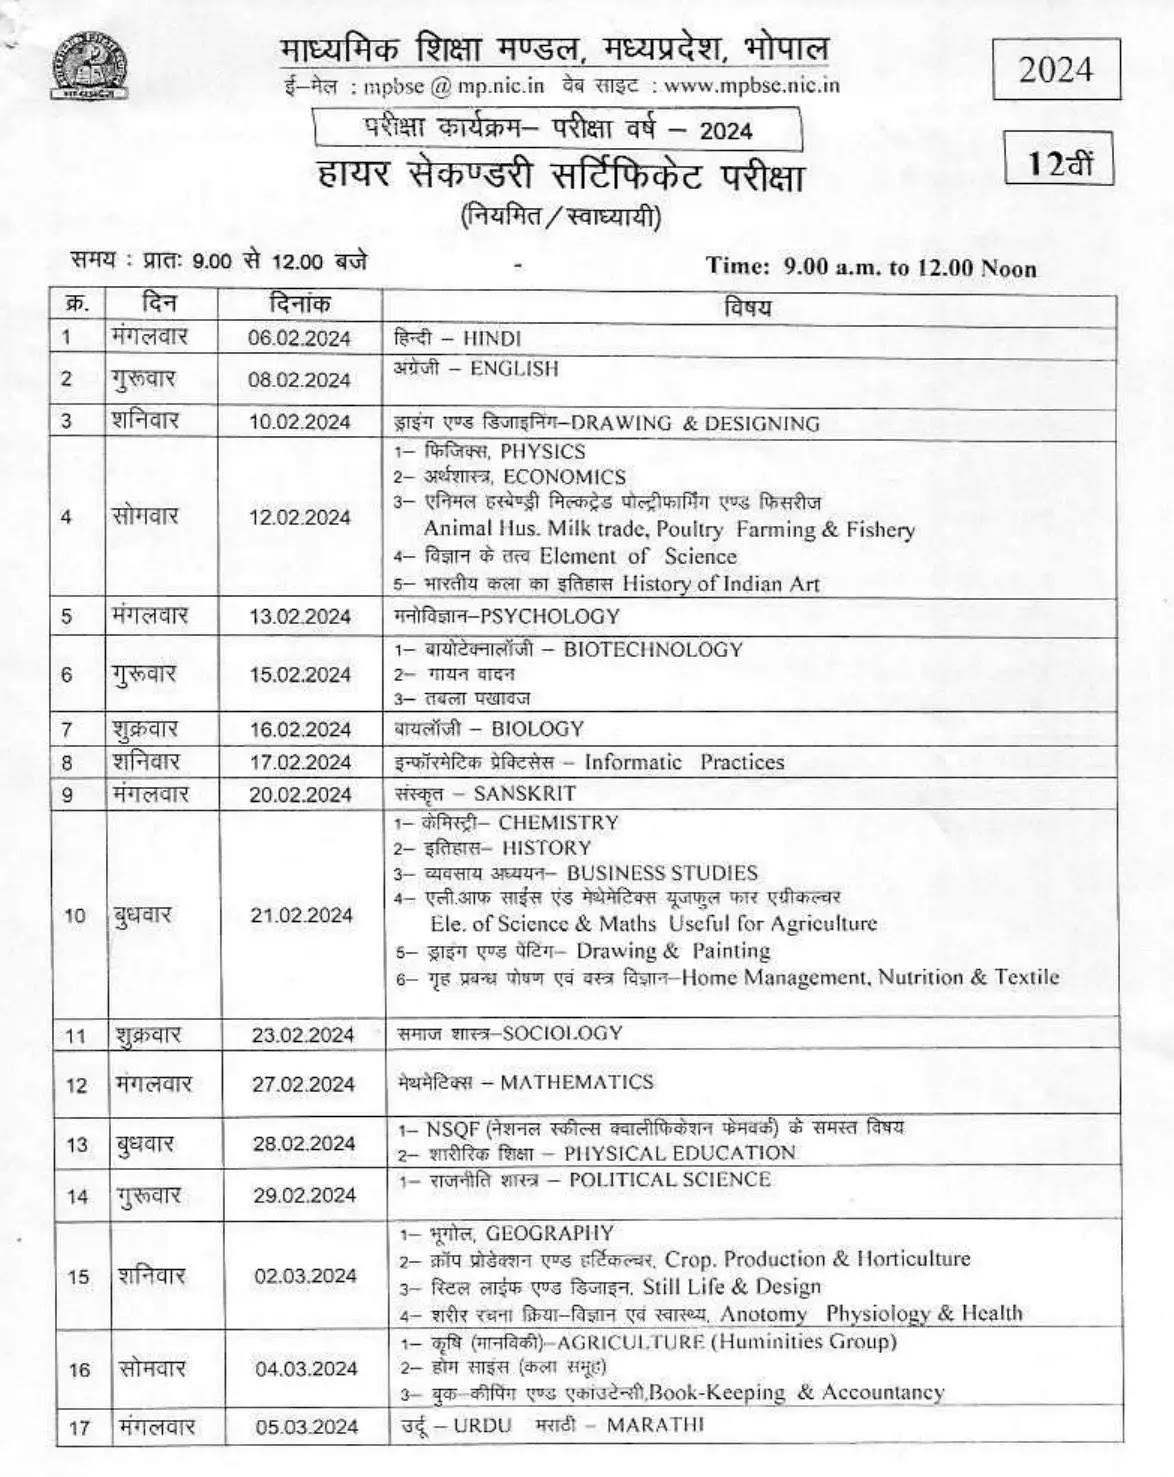 MP Board 12th class time table 2024